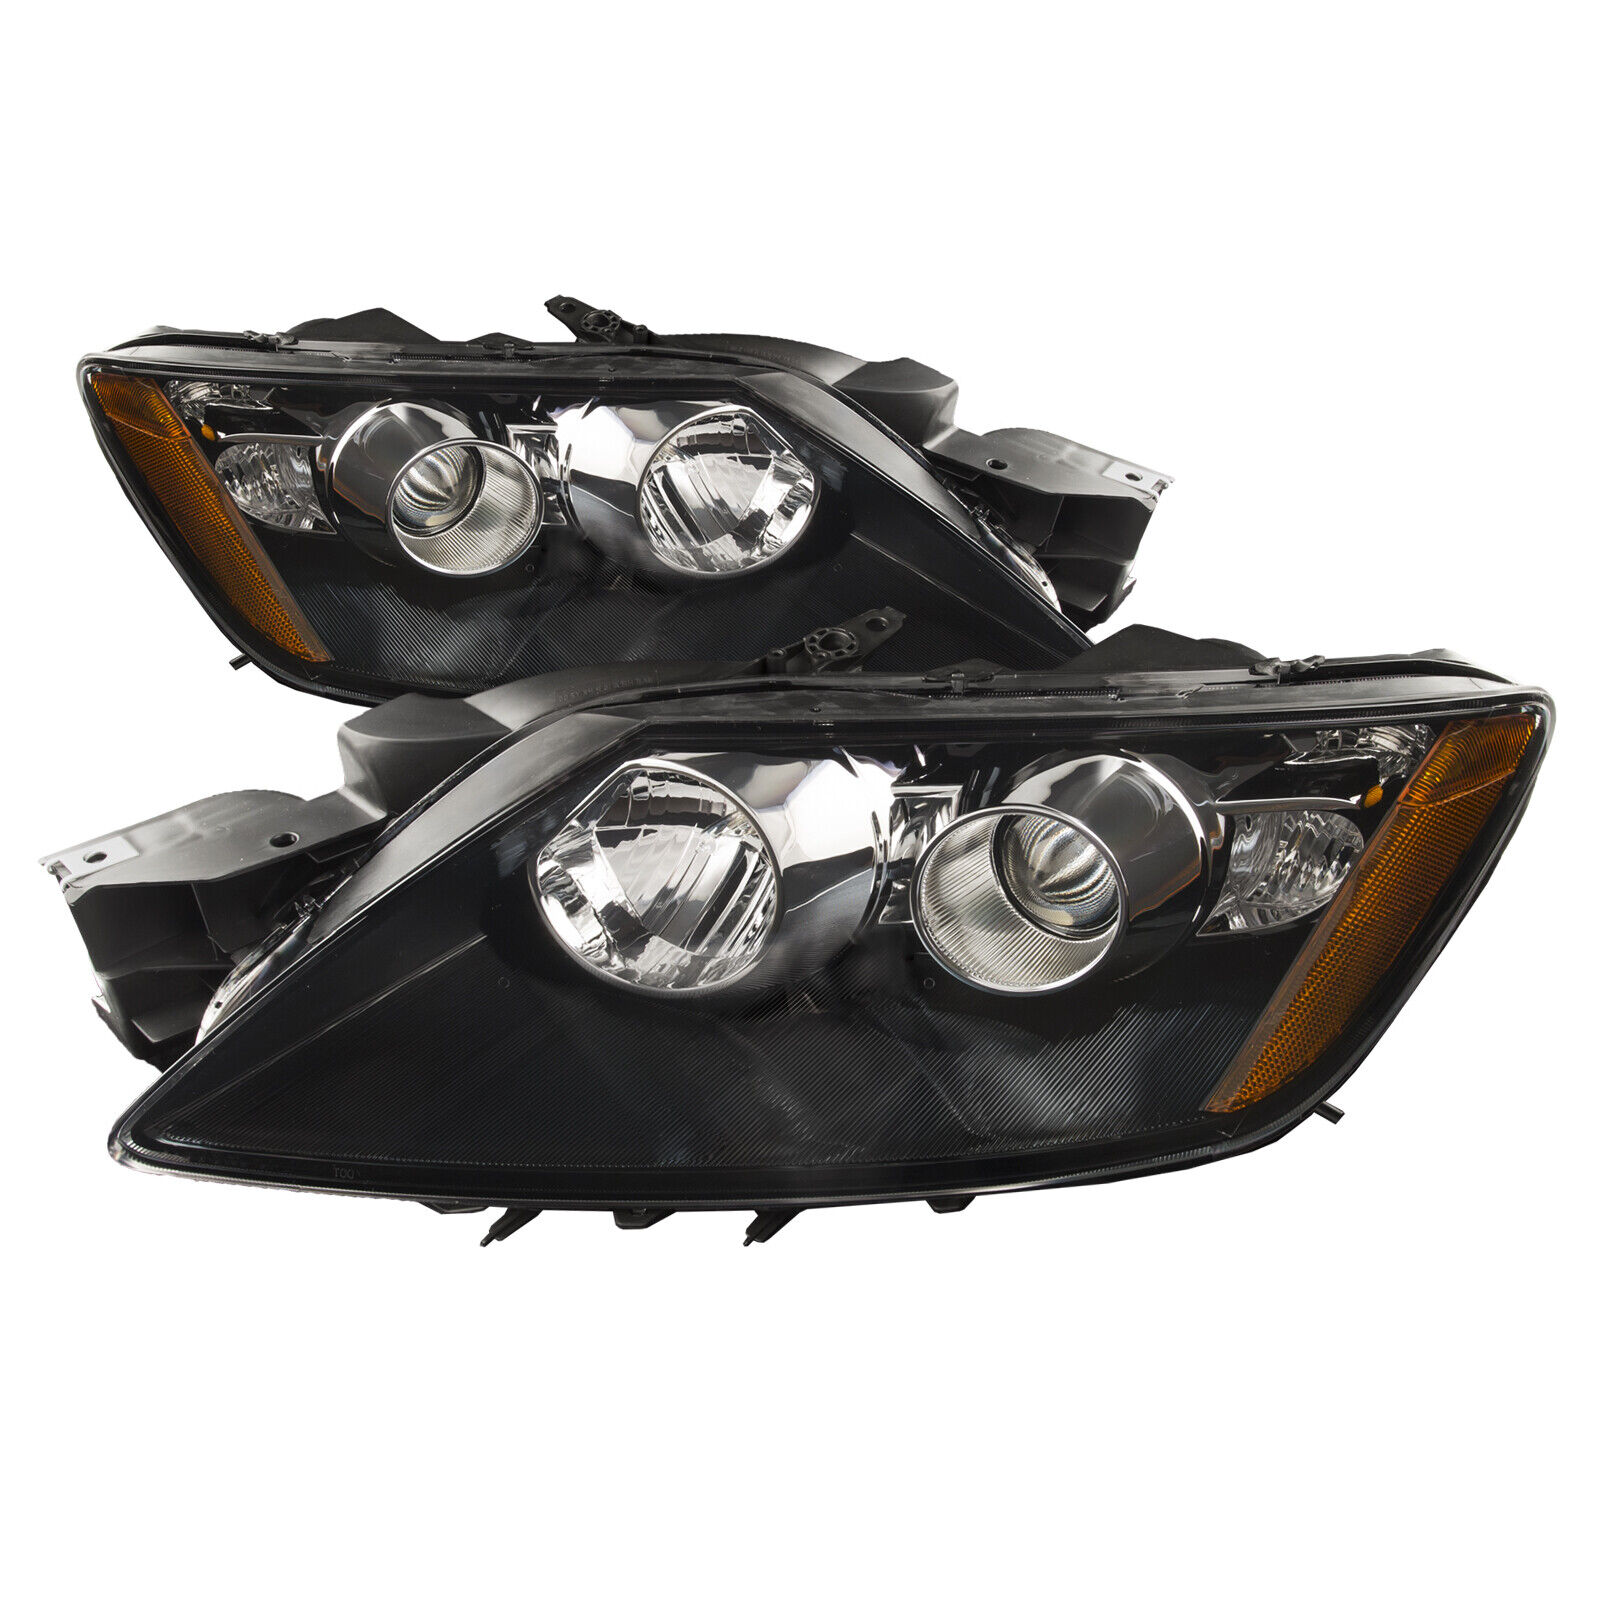 Fits 2011-2012 Mazda Cx-7 Left and Right Headlights Set With Performance Lens